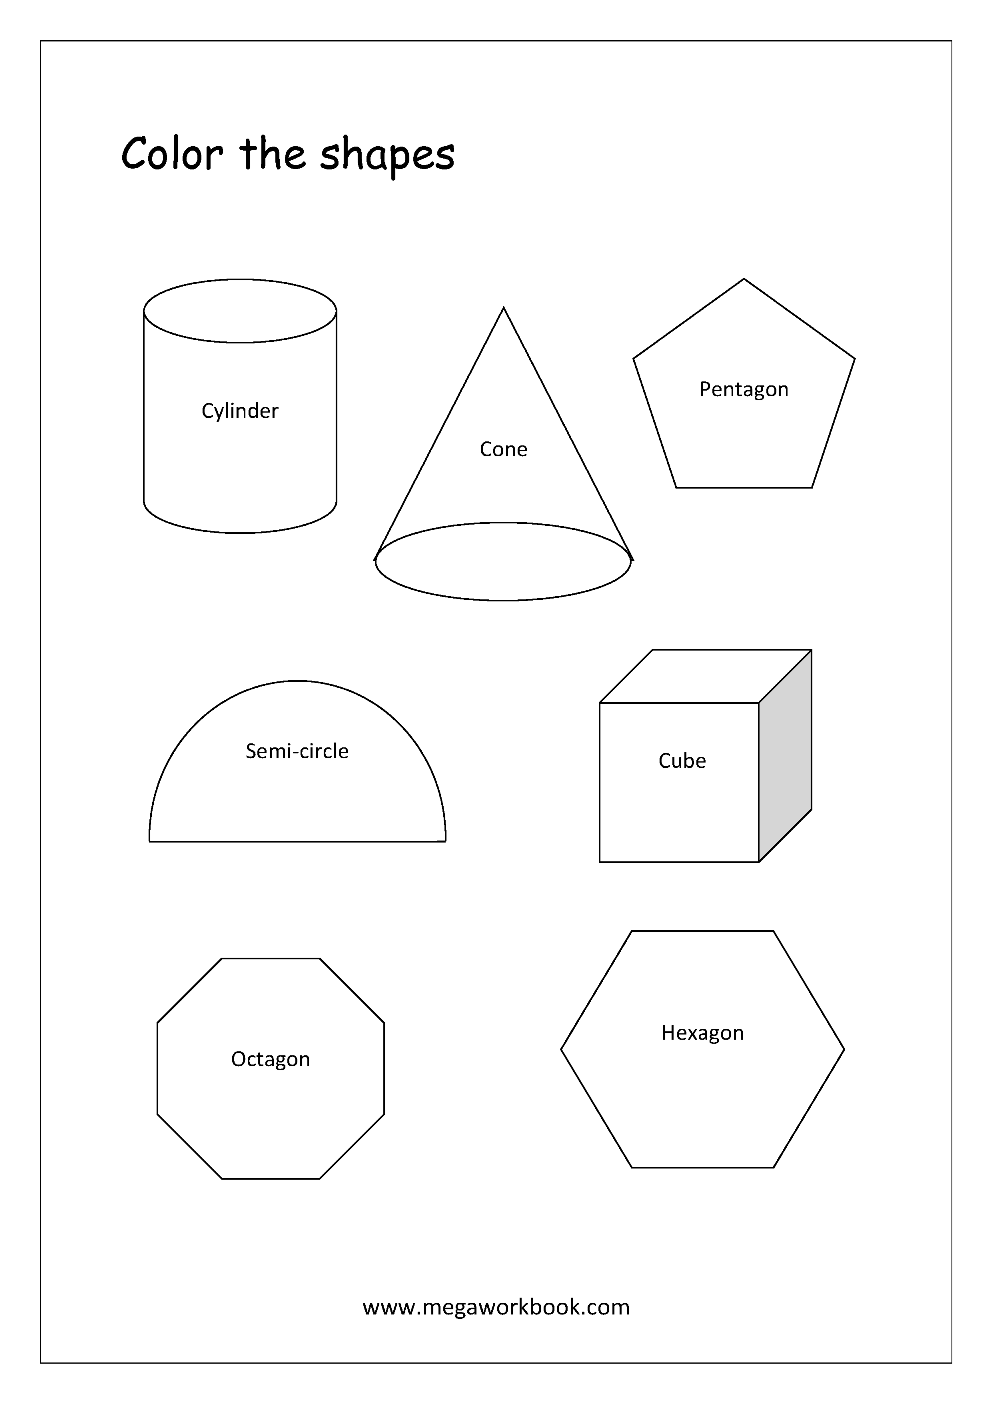 free printable shapes worksheets tracing simple shapes pre writing skills worksheets for preschool kindergarten 2d shapes circle square triangle rectangle semicircle etc megaworkbook